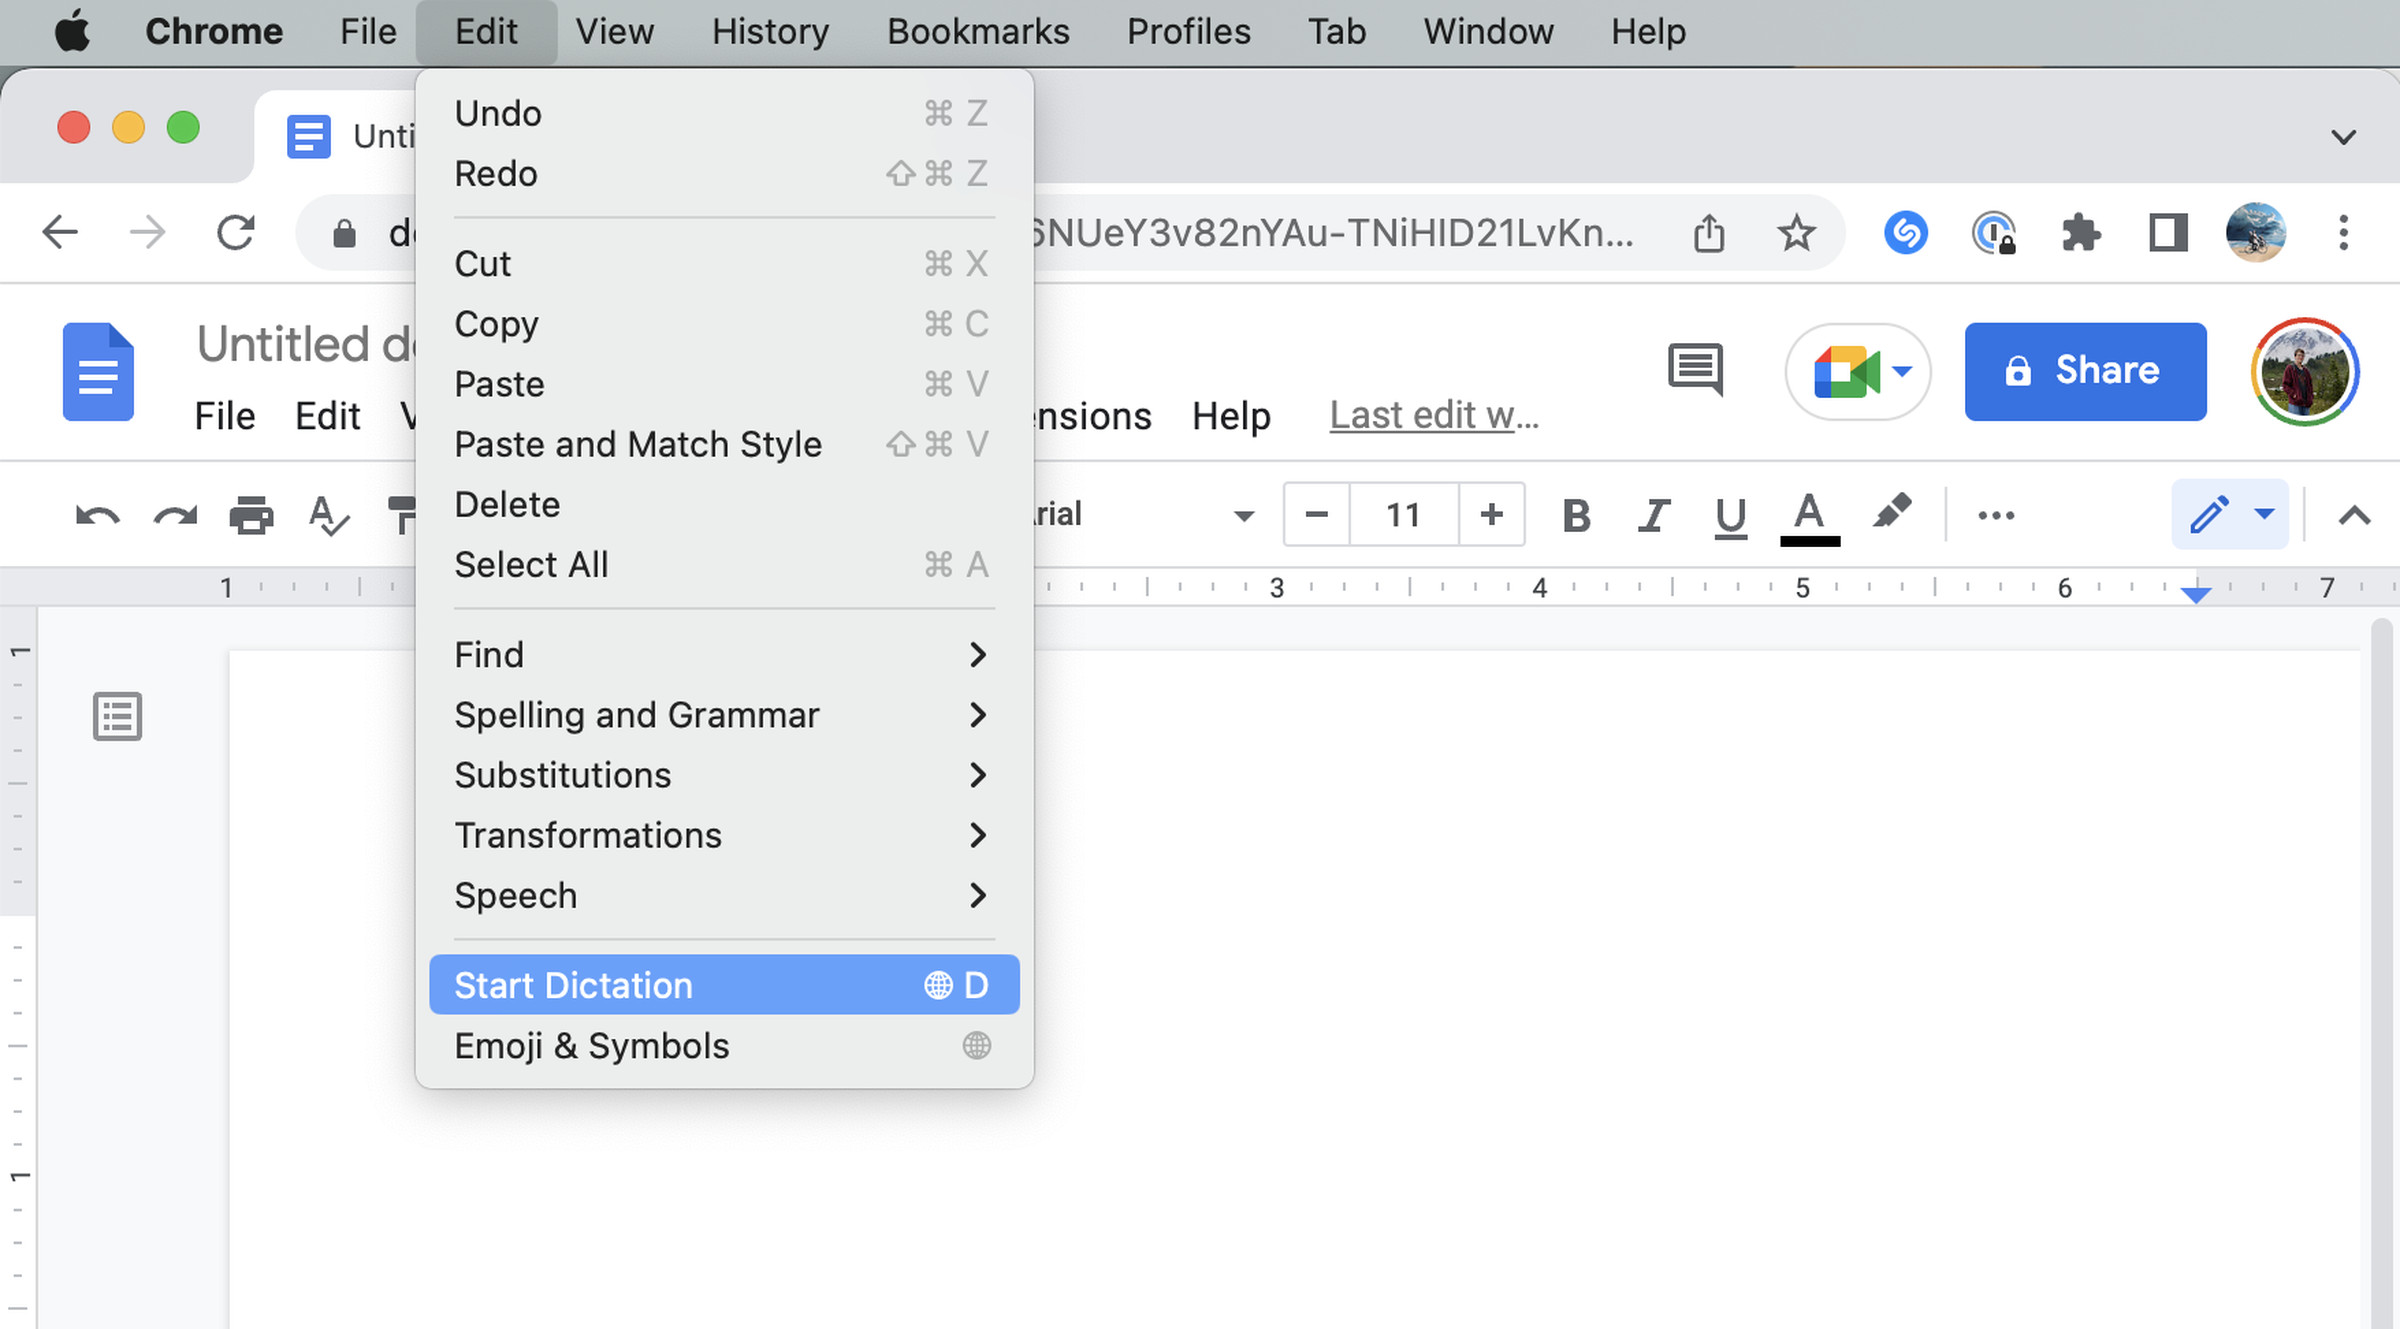 If an app or menu has its own Edit menu, you can use the one in the menu bar to access the Start Dictation option.